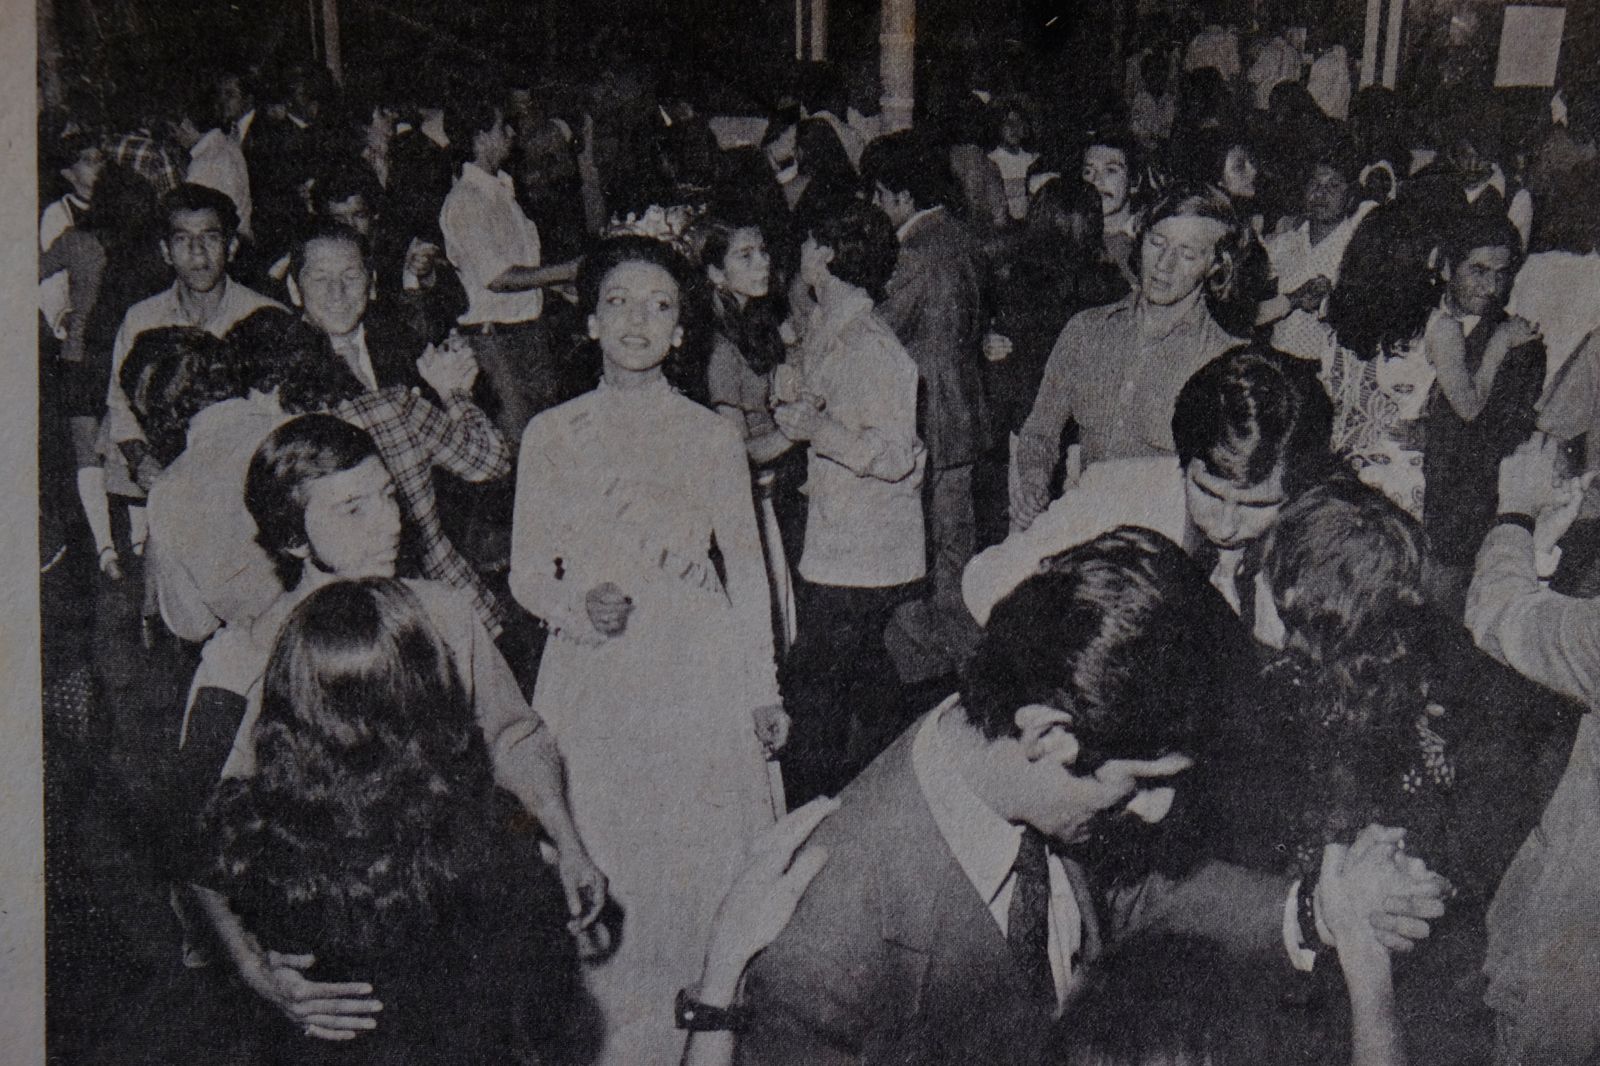 © Santiago Escobar-Jaramillo - Newspaper clipping of a photo shows the beauty pageant dancing alone in the Social Club of Manizales, Colombia.